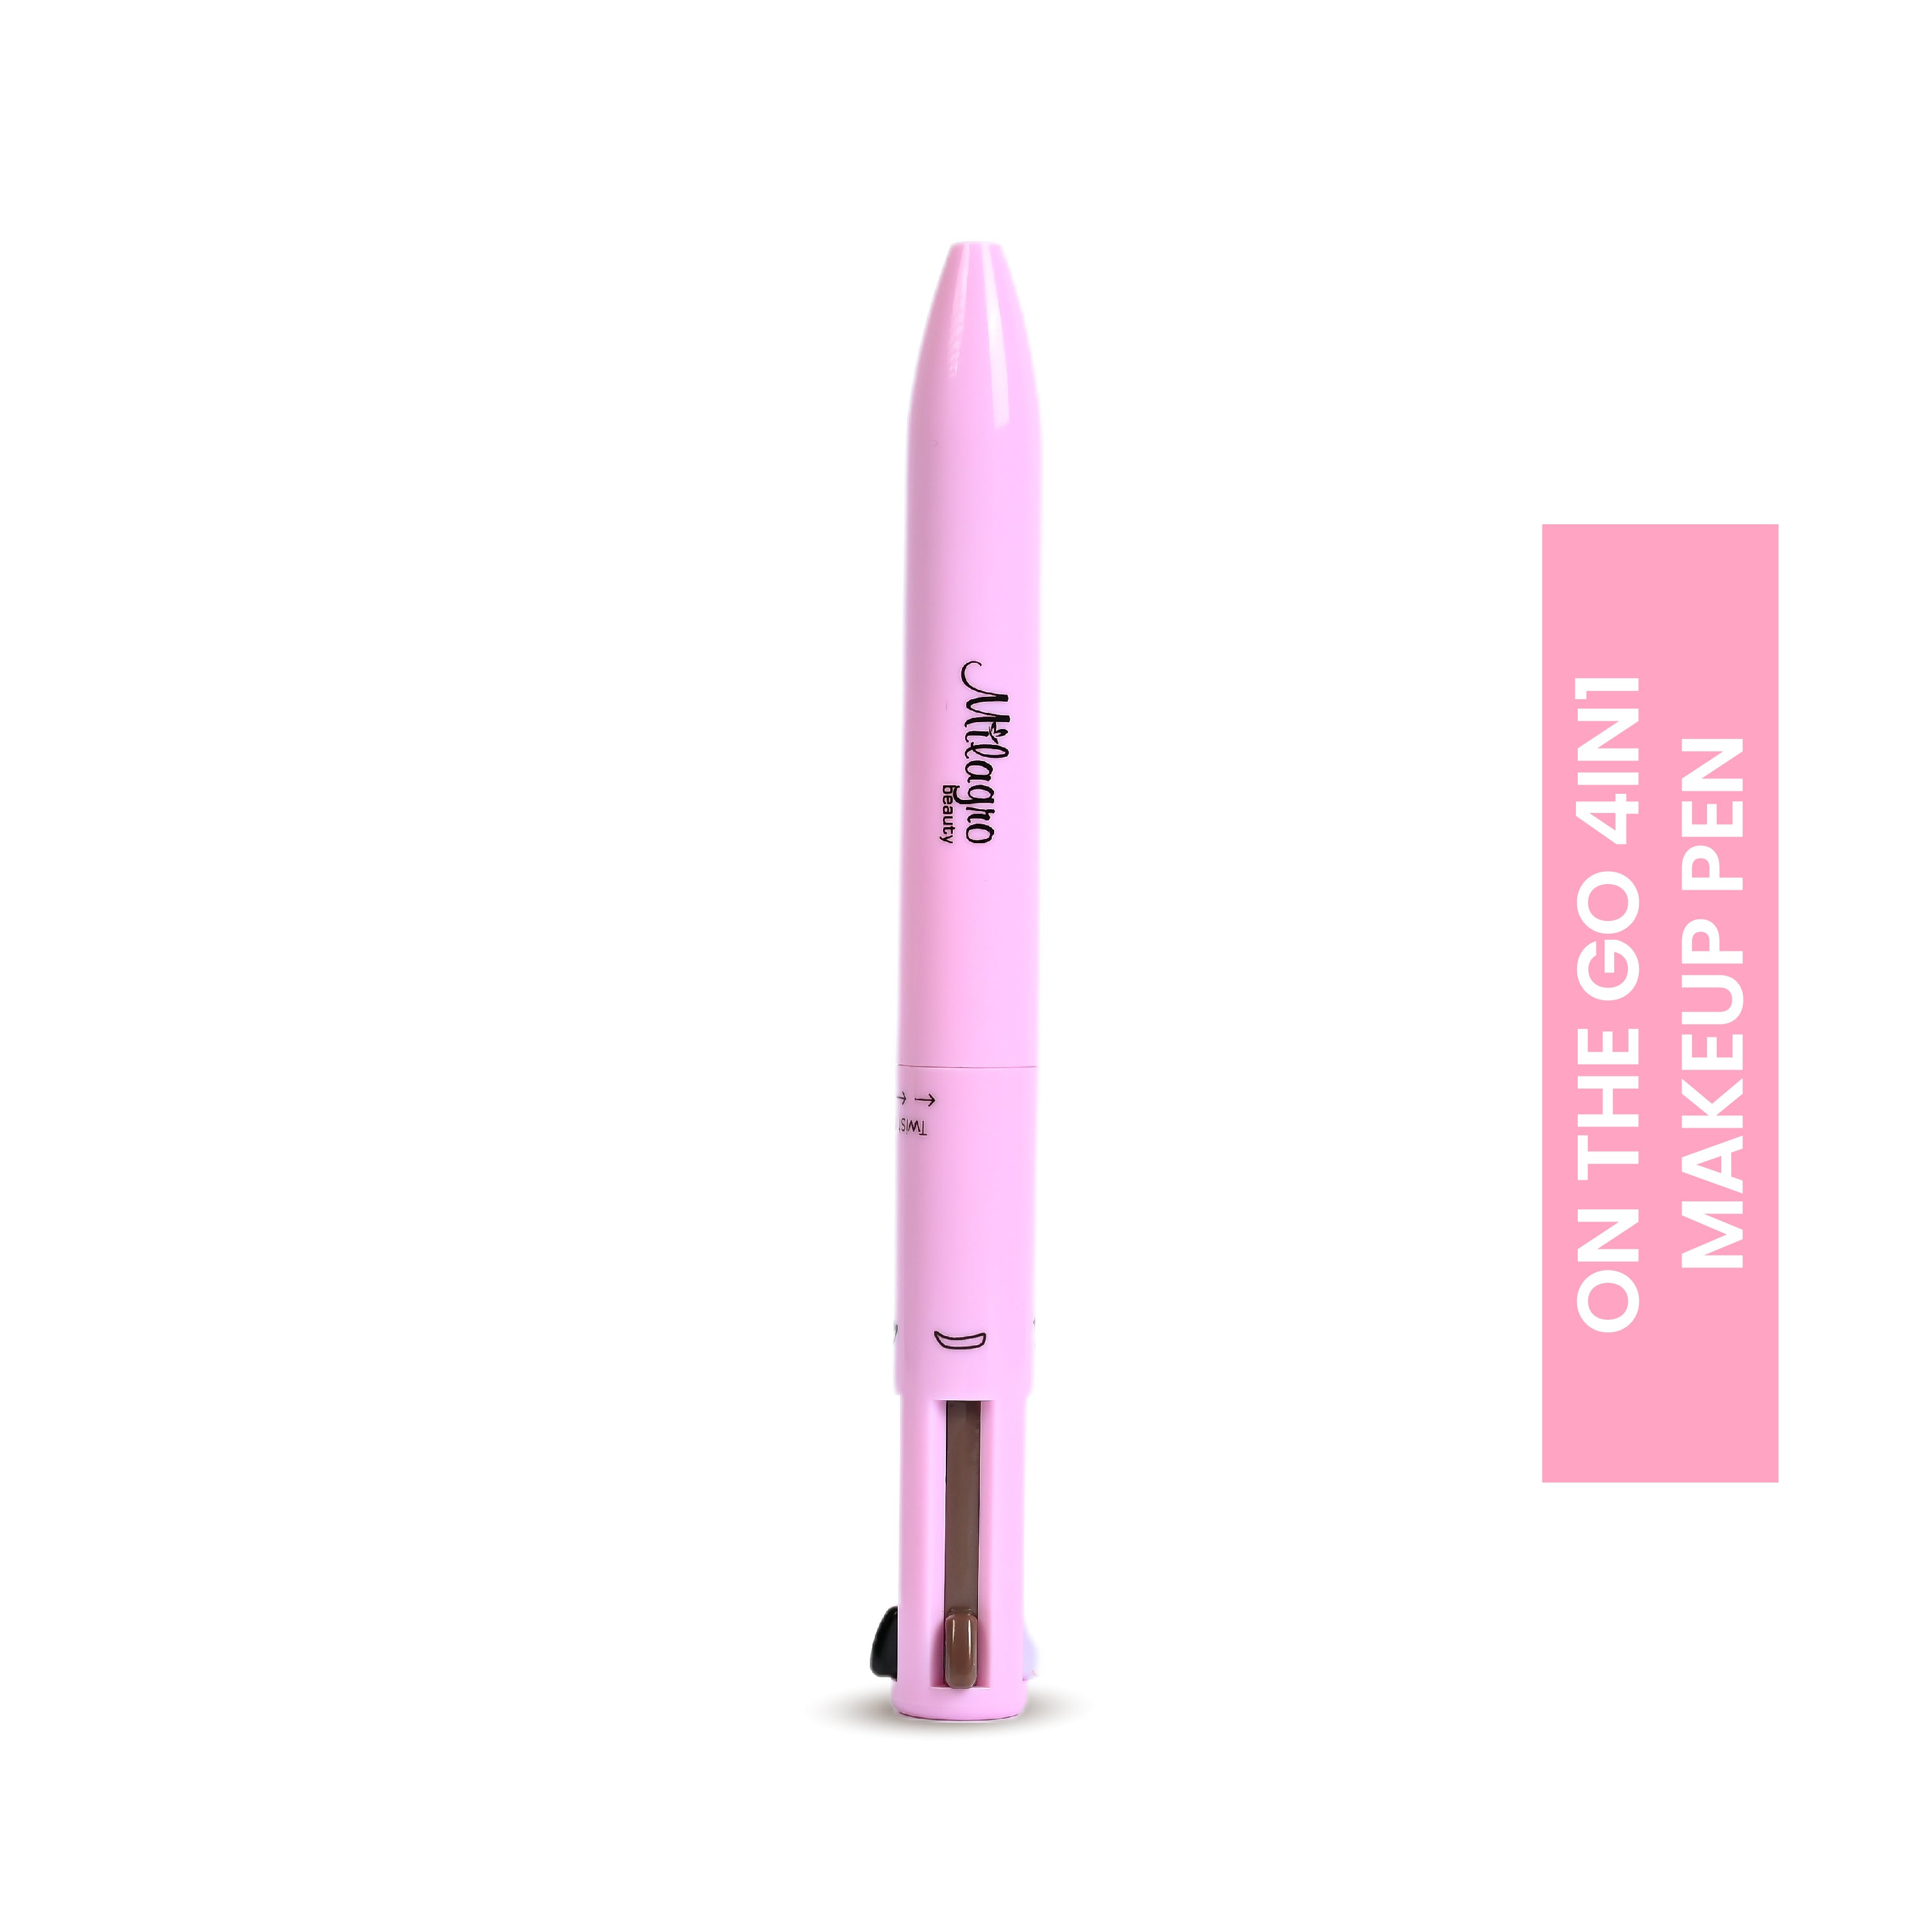 On The Go 4in1 Makeup Pen